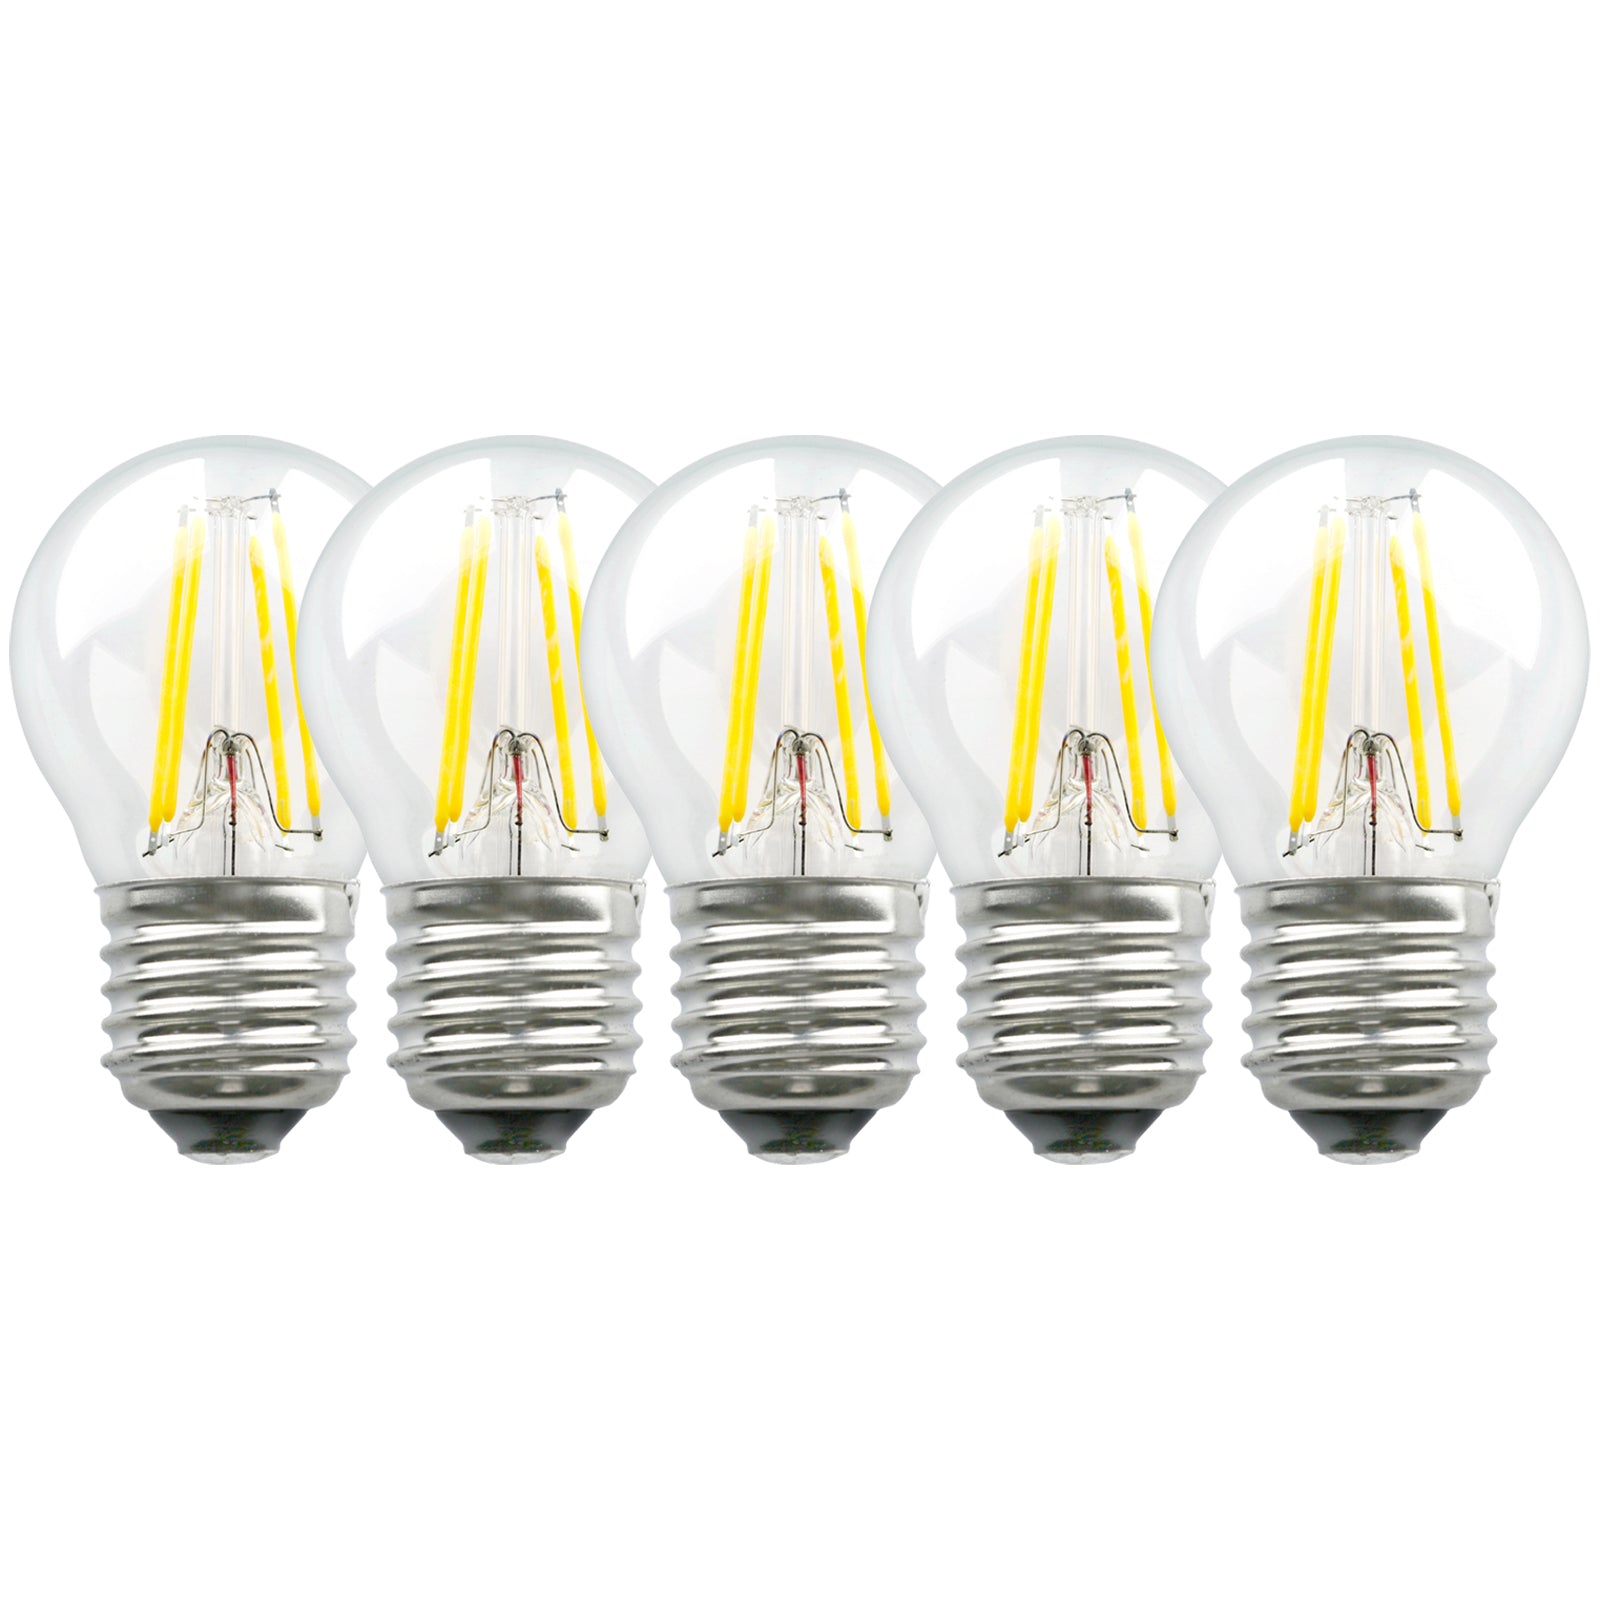 E27 4.5 Watts LED Golf Ball Bulbs, Warm White Dimmable, Pack of 5